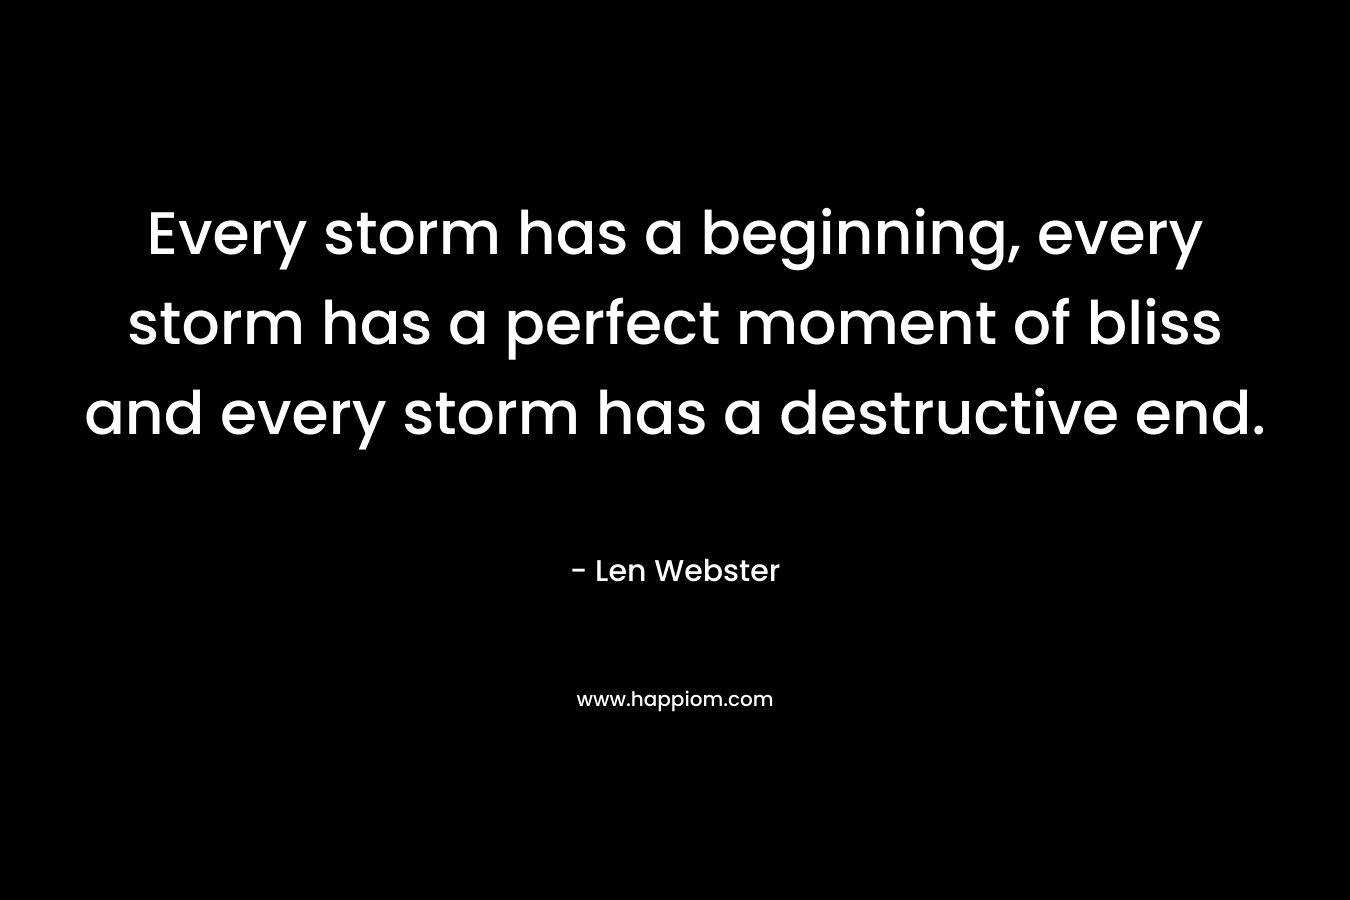 Every storm has a beginning, every storm has a perfect moment of bliss and every storm has a destructive end.